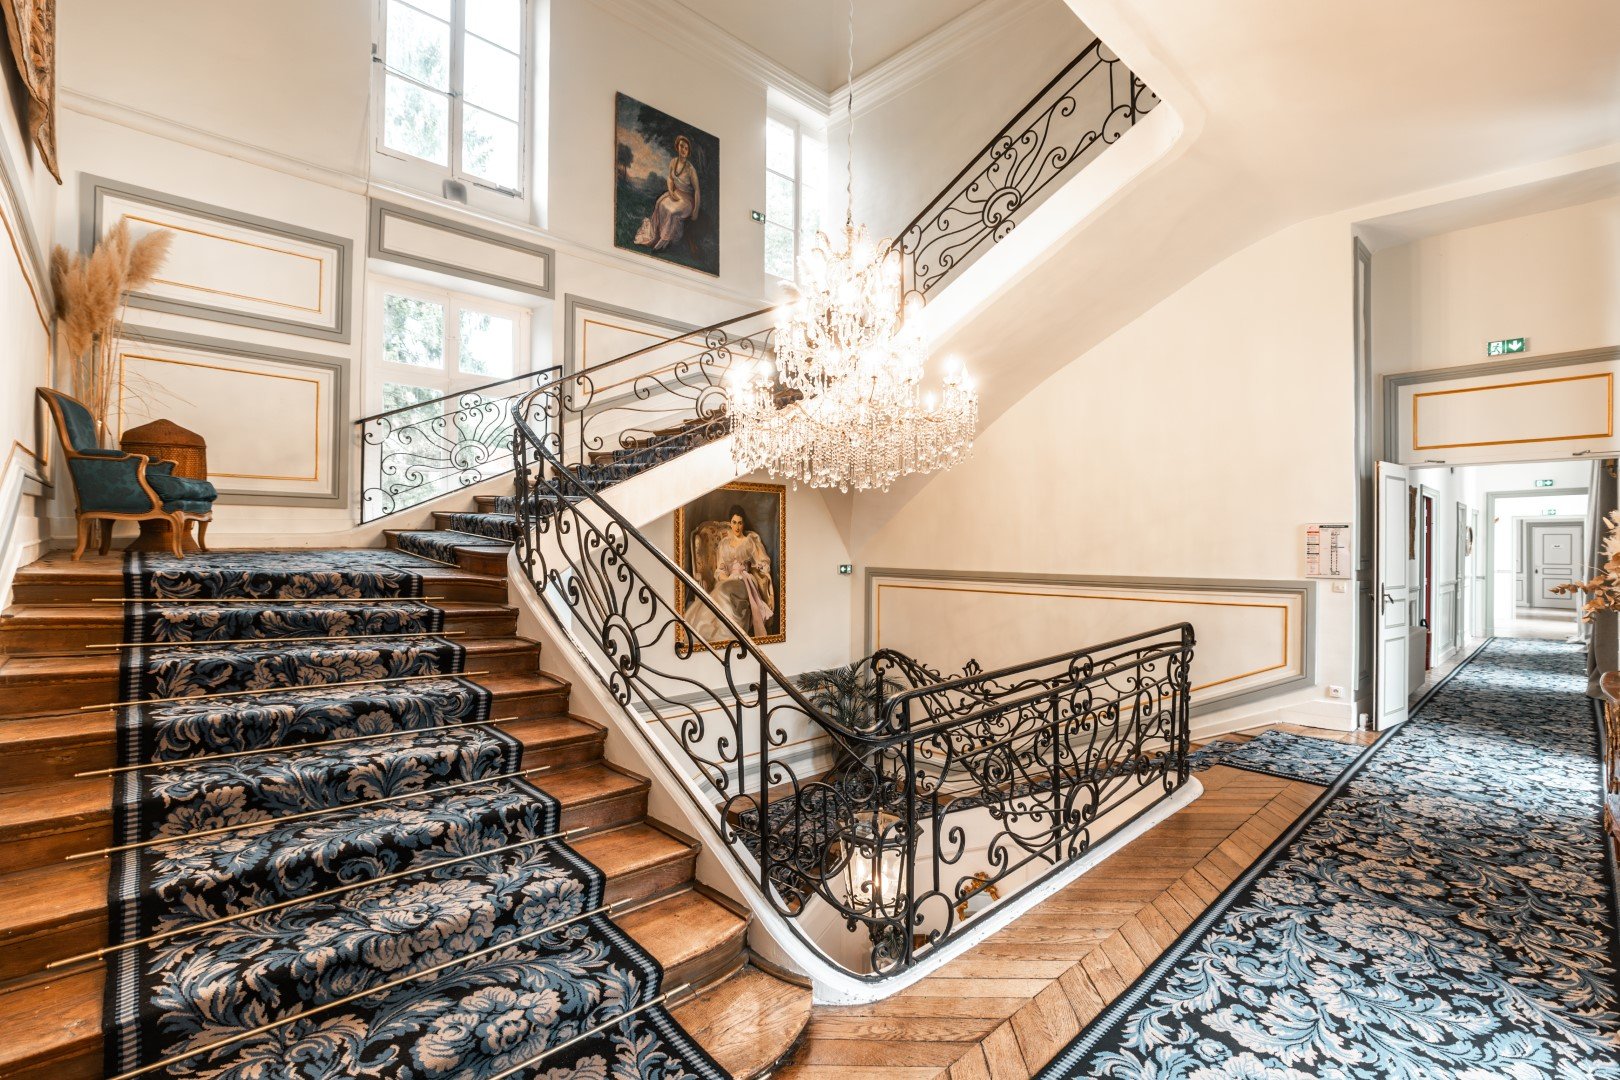 Magnificent period staircase